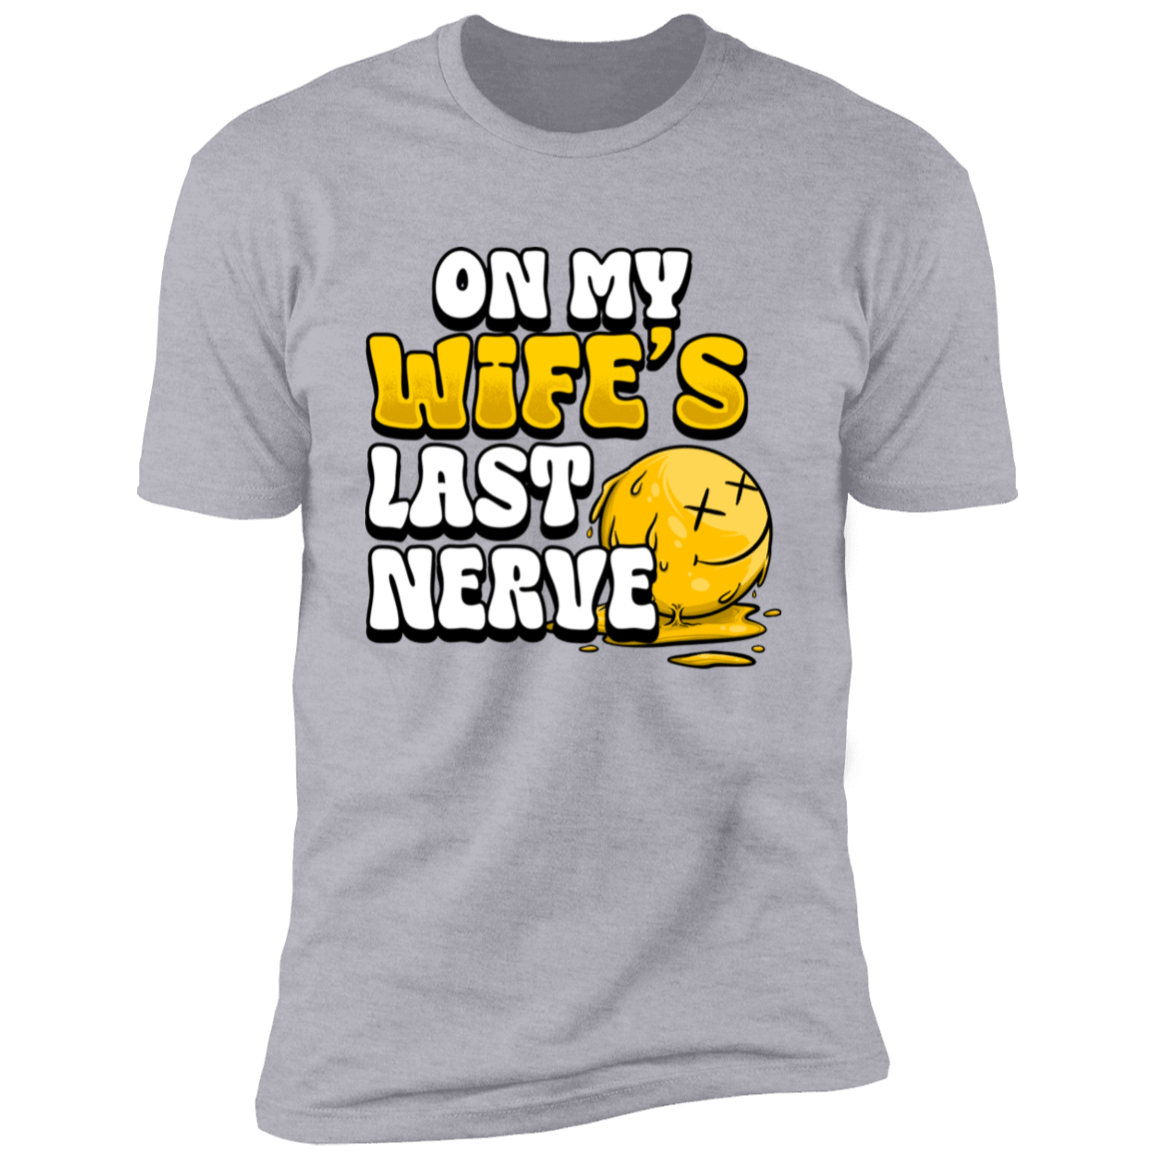 On My Husbands Last Nerve & On My Wife's Last Nerve Deluxe Tees